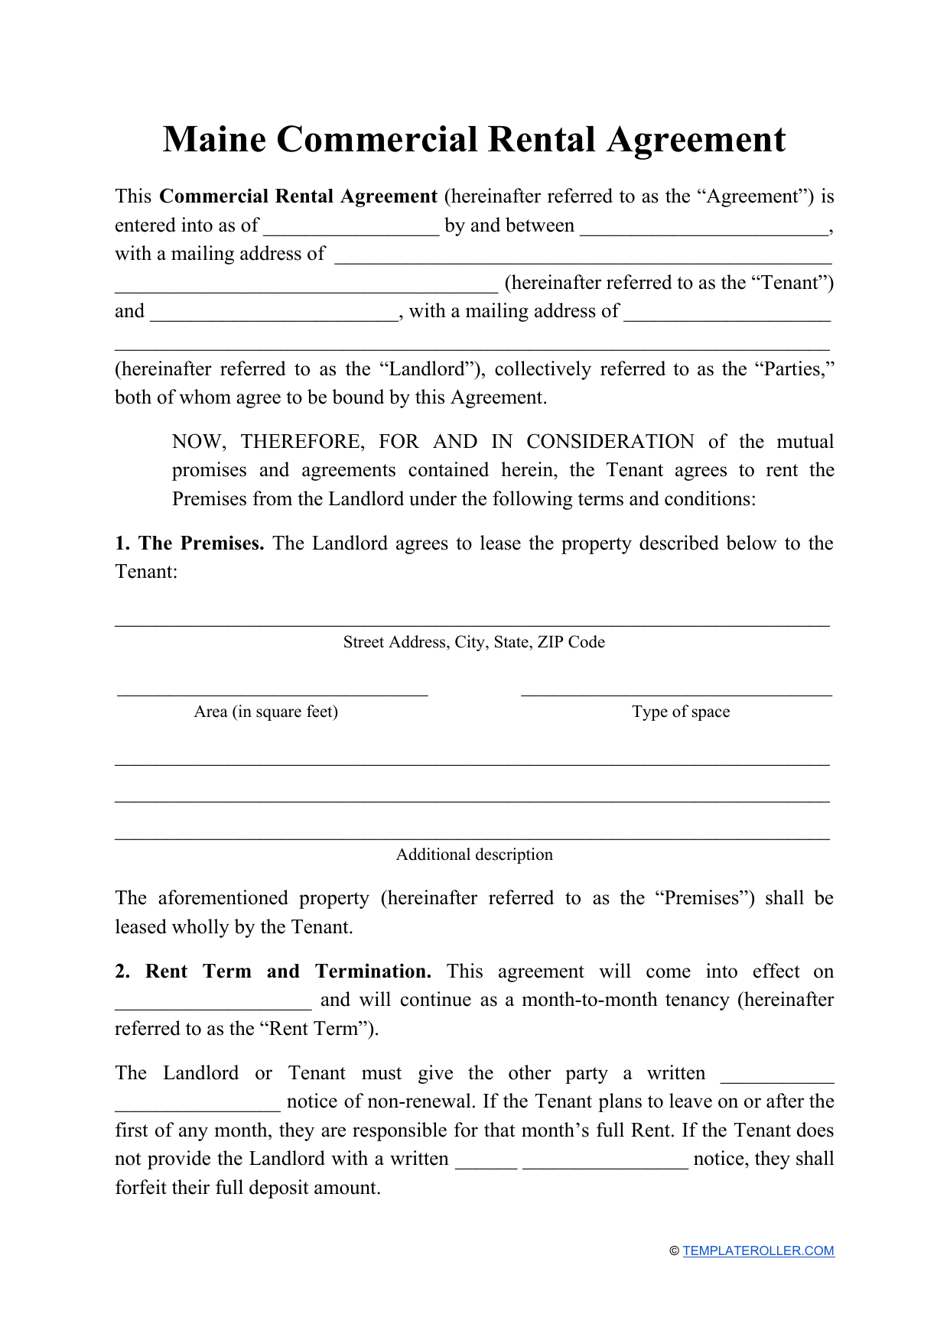 Commercial Rental Agreement Template - Maine, Page 1